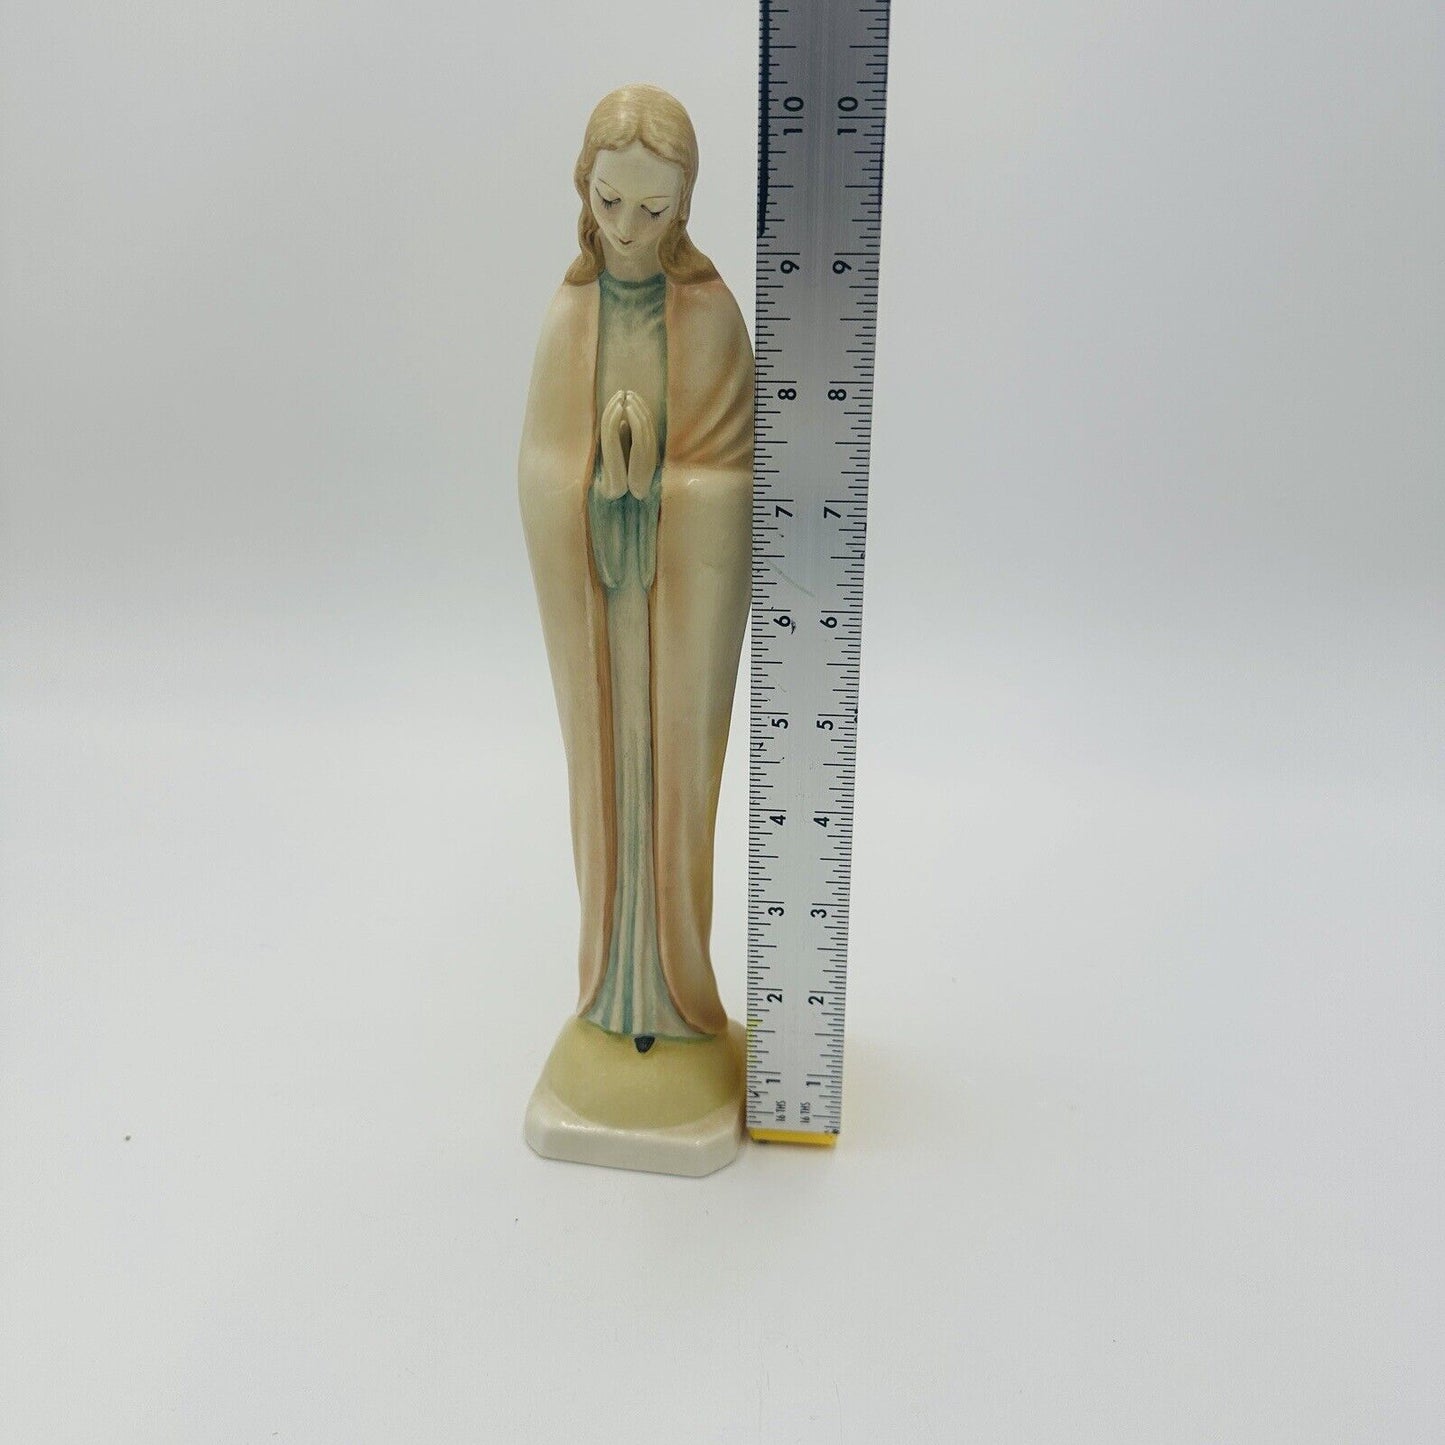 Hummel Madonna #46/0 Figurine Made in Western Germany 1950's Mary 10”